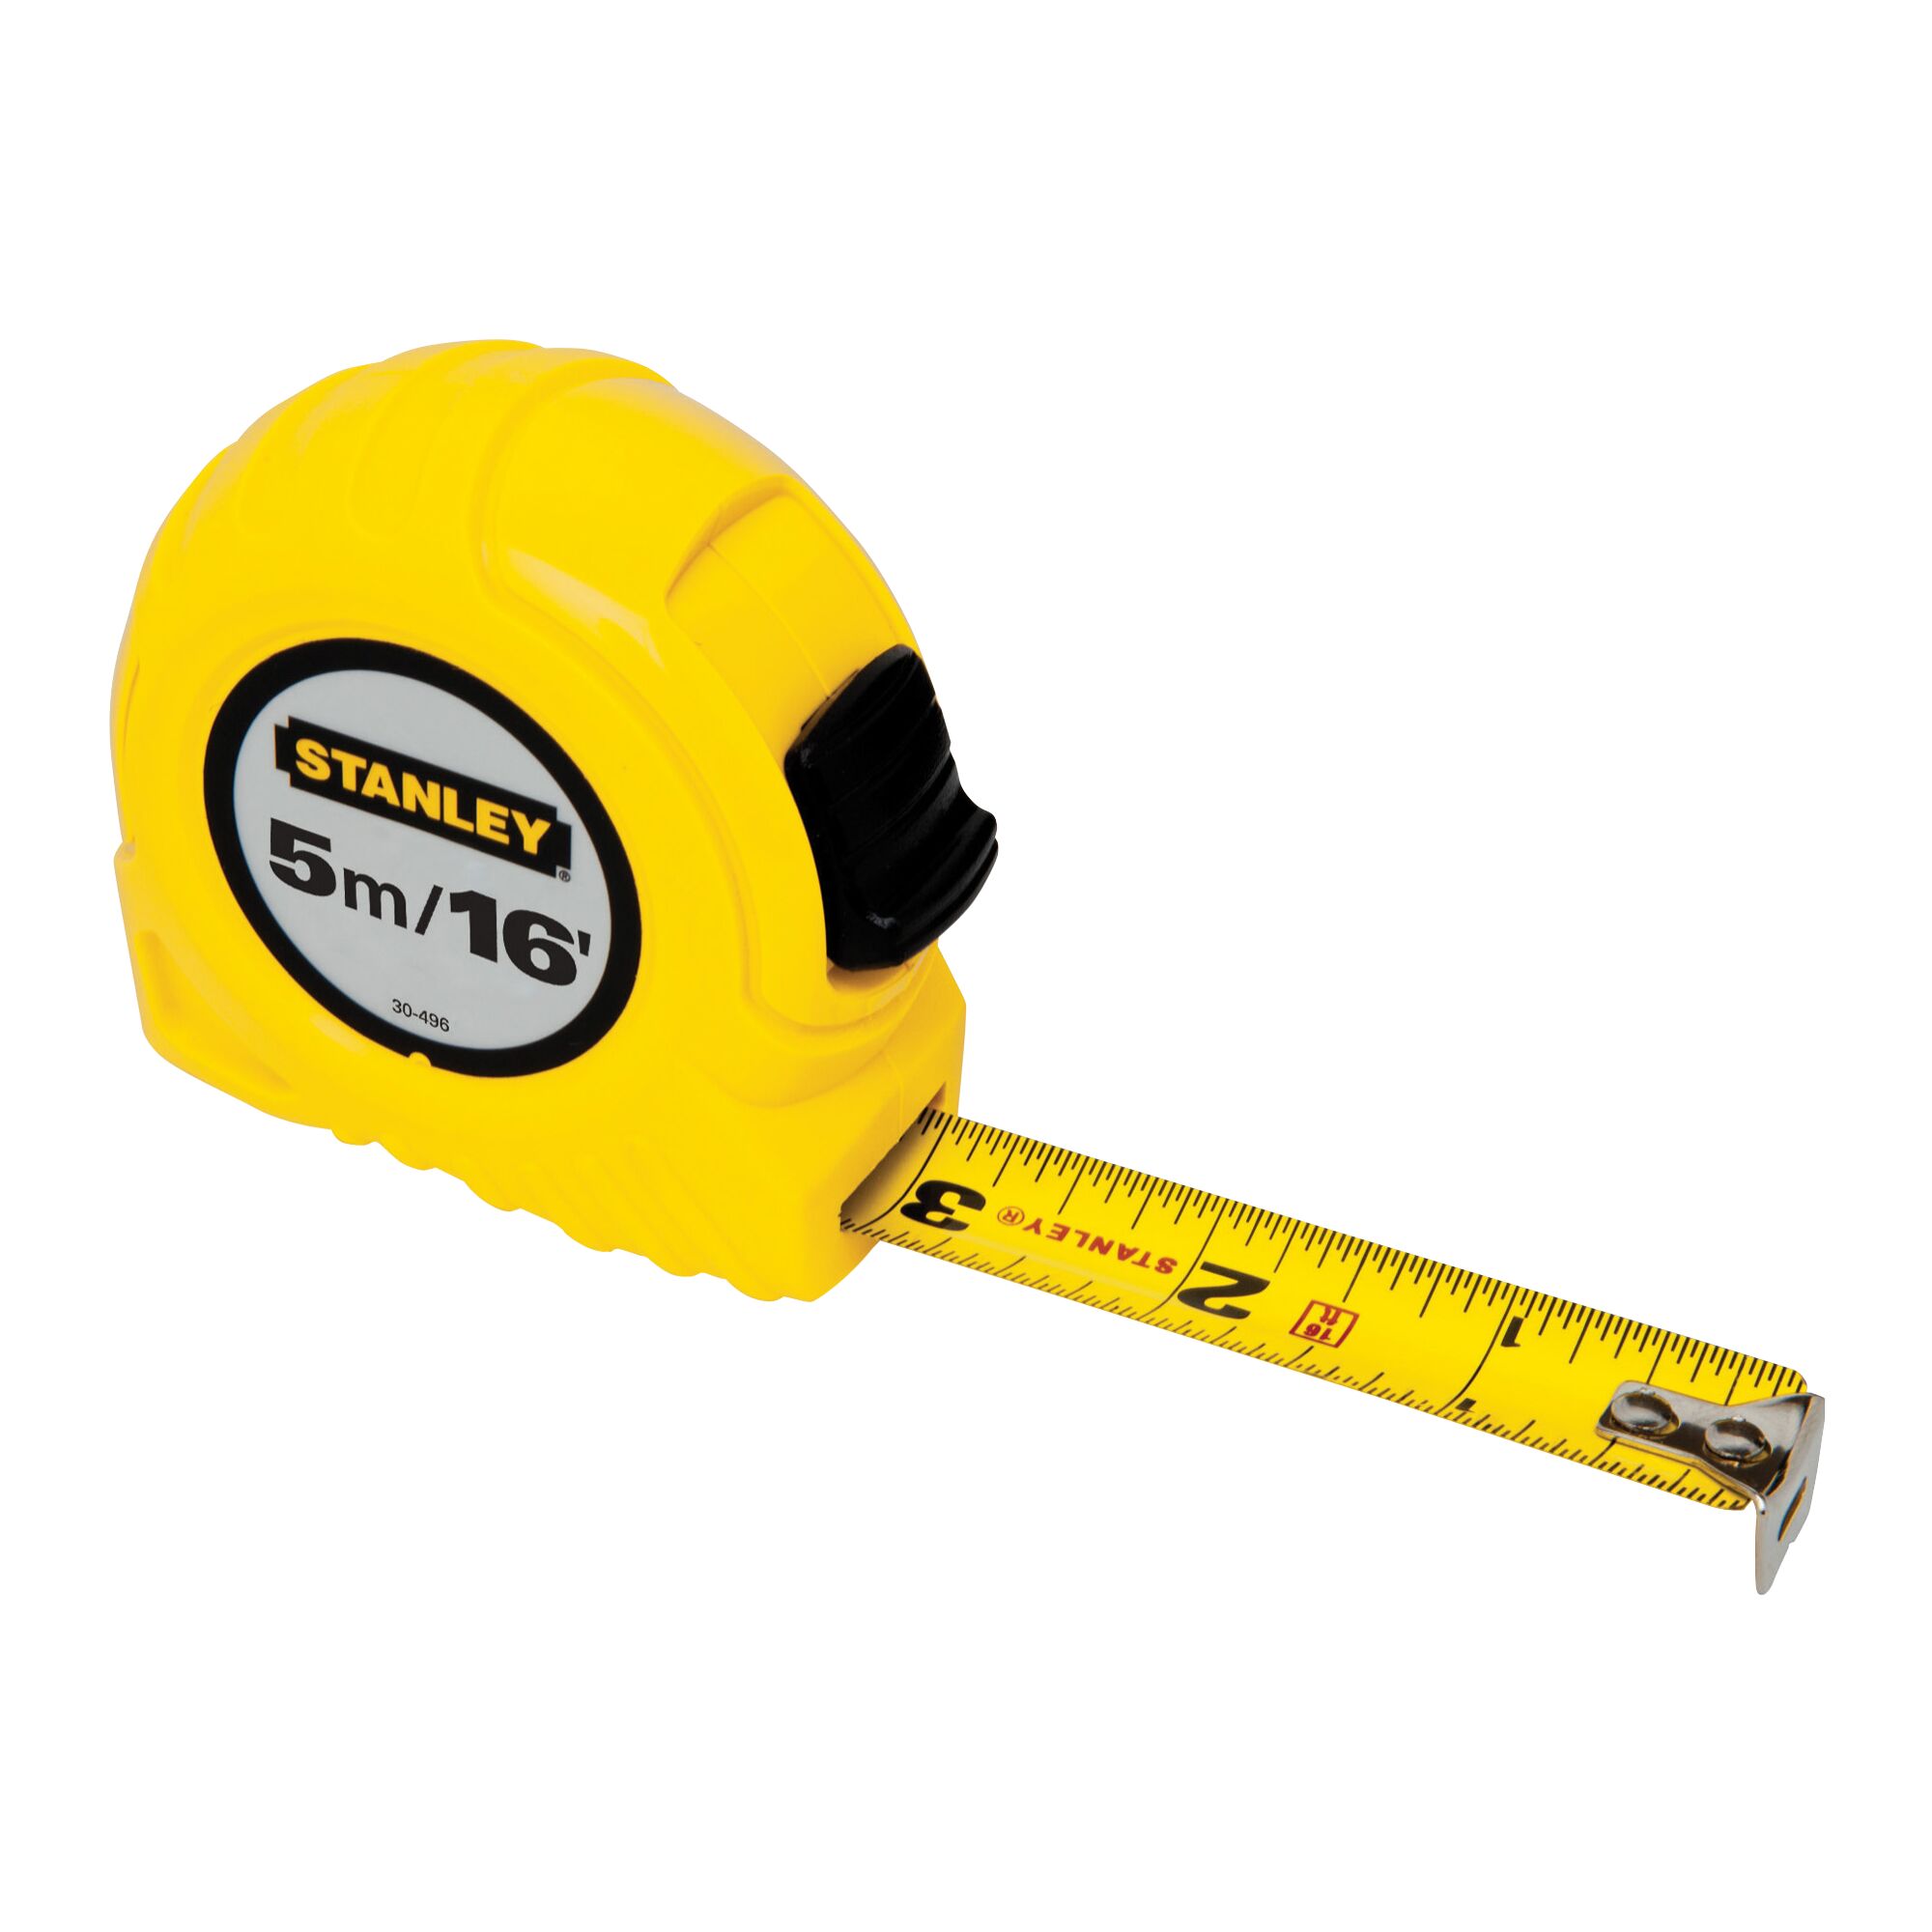 Strong Belt Clip Inches and Metric Measuring Tape for Construction Tape Measure 16-Foot Smooth Sliding Nylon Coated Ruler by Magnelex 5m Impact Resistant Rubber Covered Case Home Use and DIY 